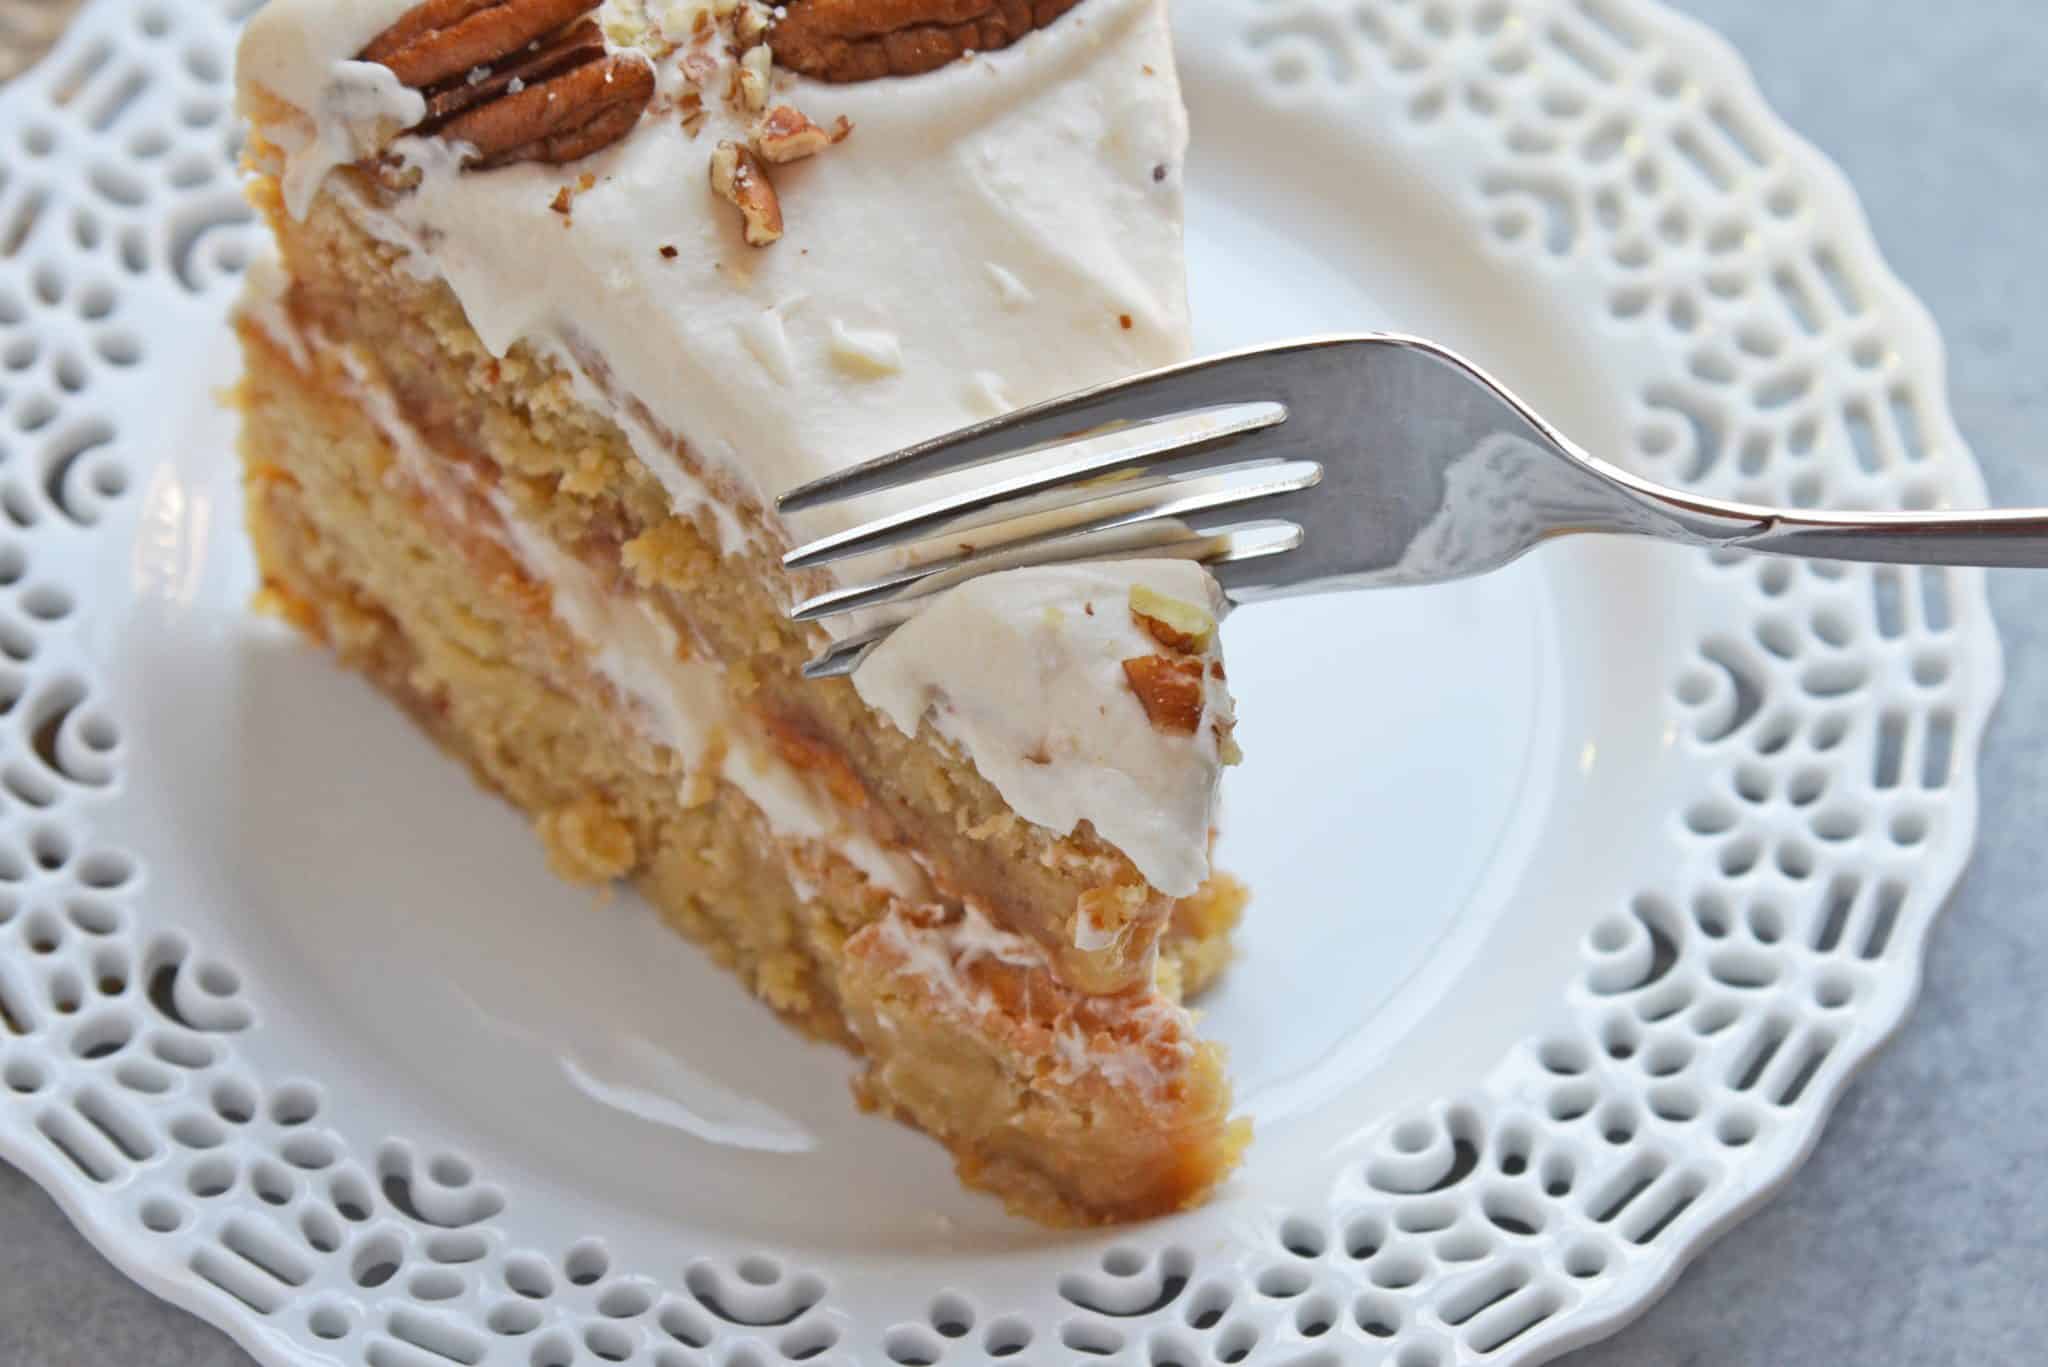 Brown Butter Caramel Cake is a two layer naked cake made with toffee bits and salted caramel frosting! The perfect summer cake or show stopping centerpiece. #caramelcake #brownbuttercake #nakedcakes www.savoryexperiments.com